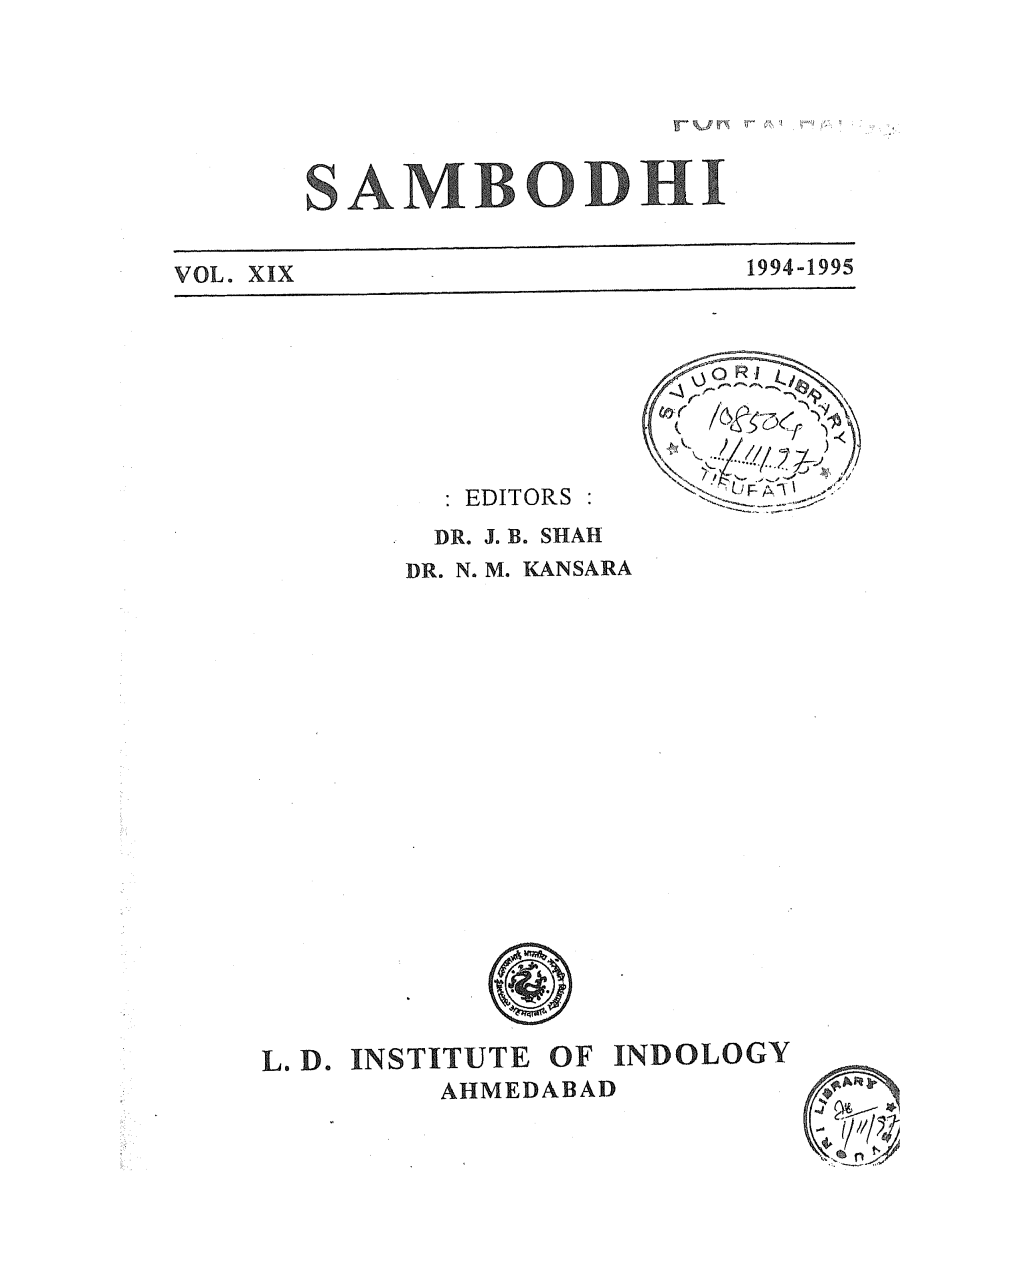 L.D. INSTITUTE of INDOLOGY AHMEDABAD Published by